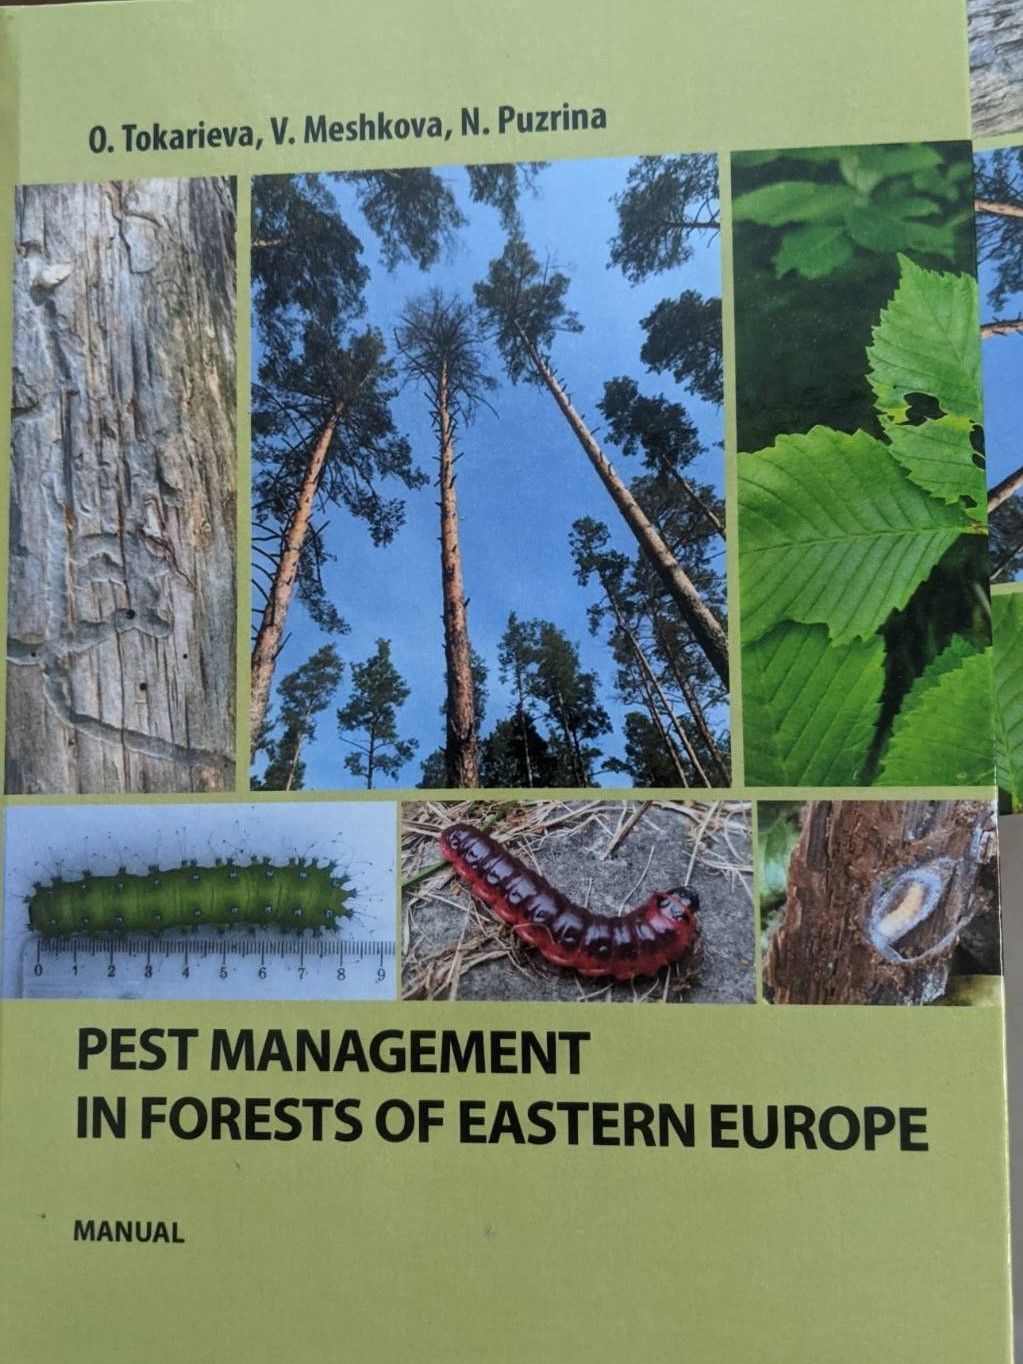 Pest management in forests of Eastern Europe (Manual)